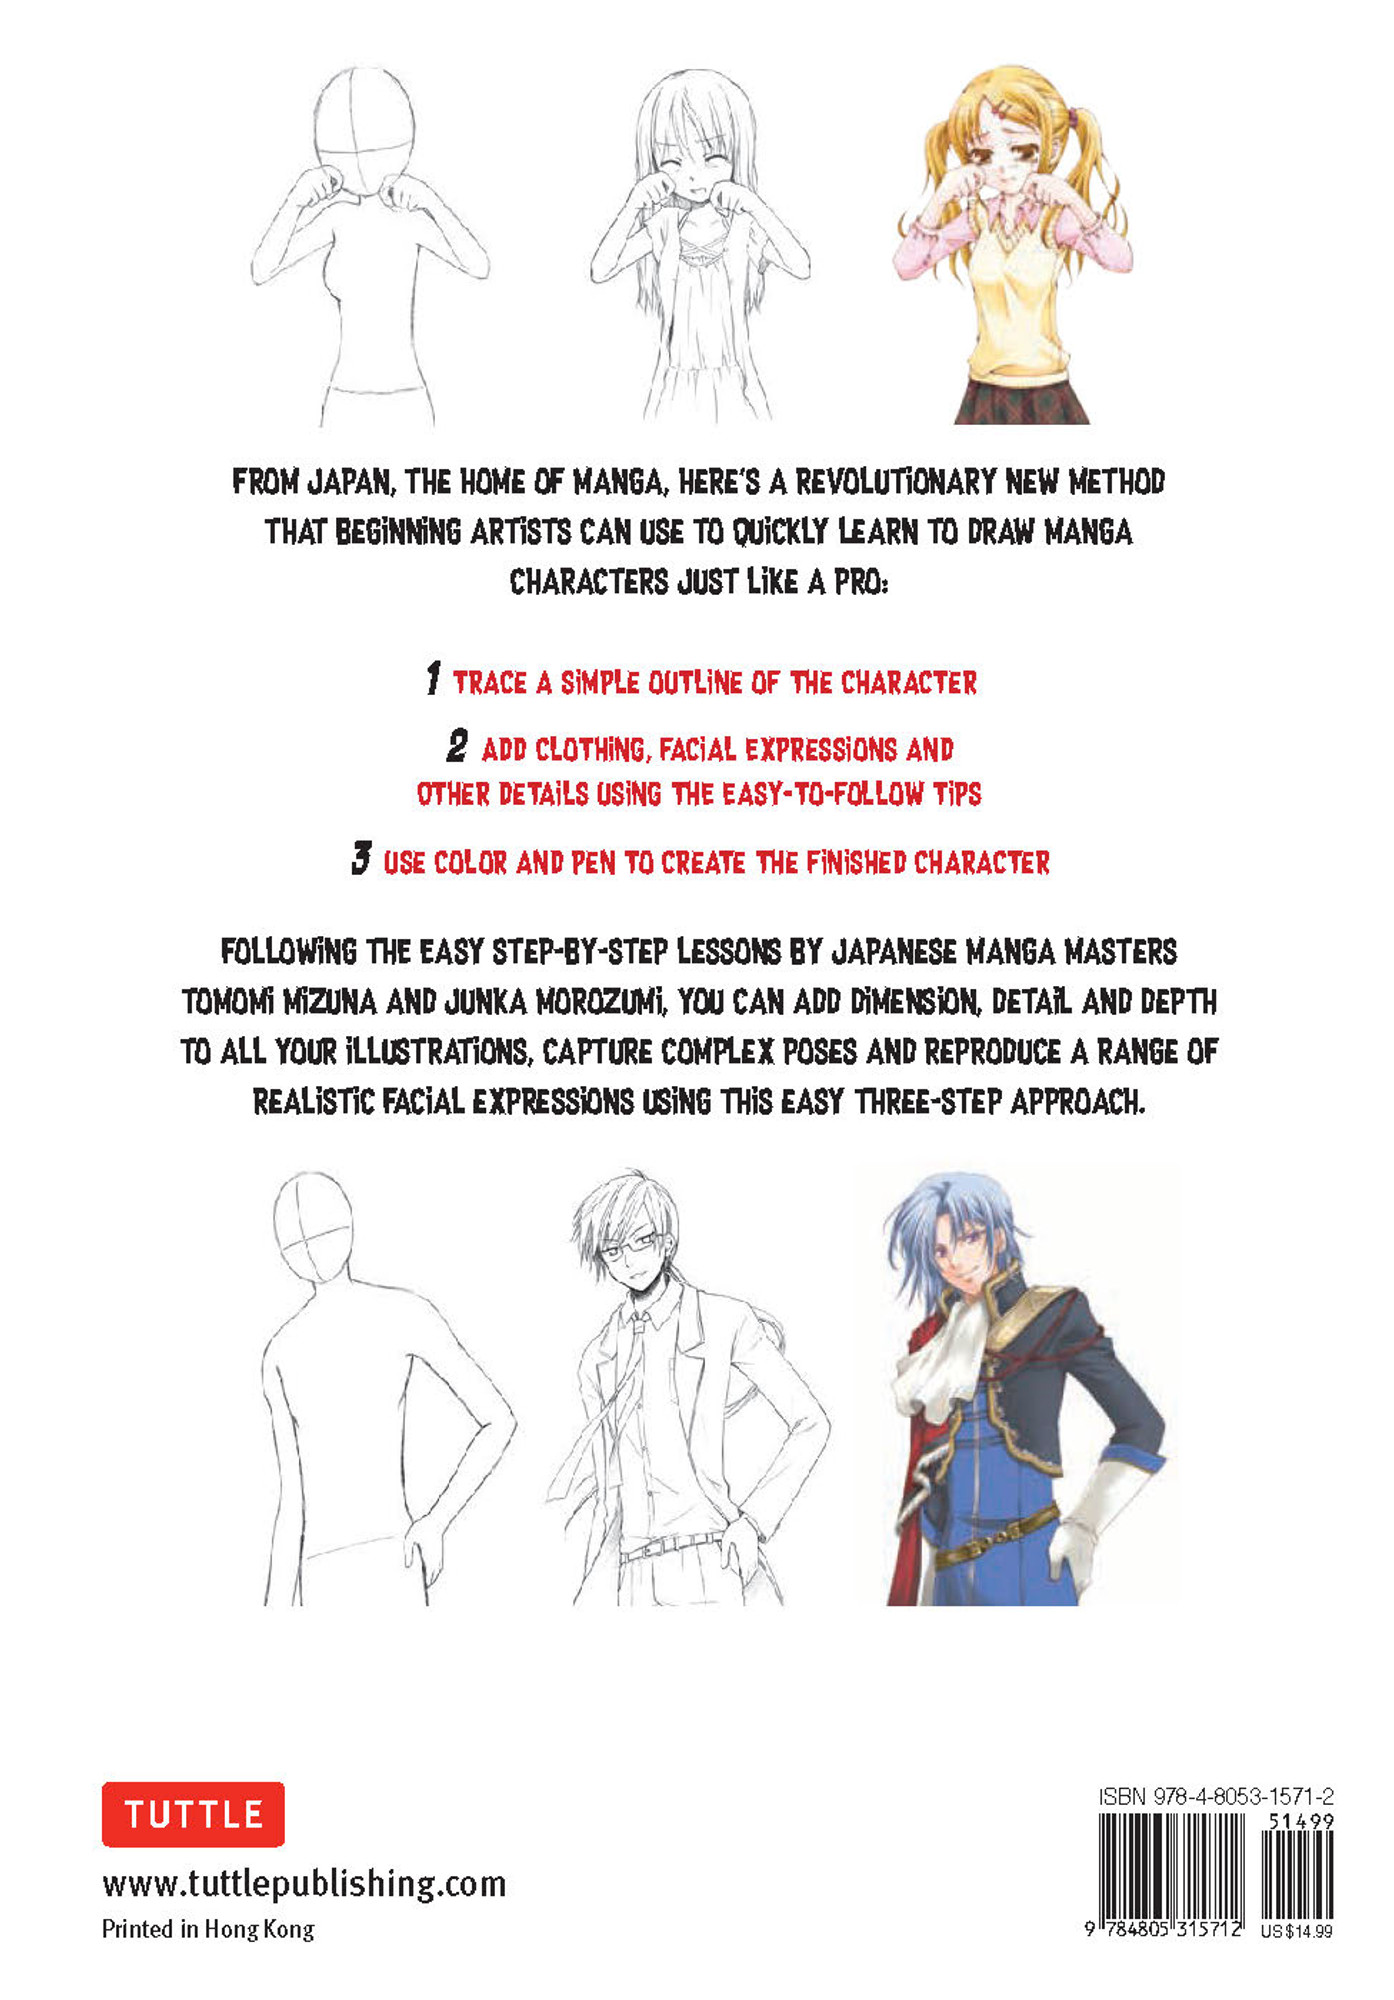 How to Draw Anime Characters for Beginner 